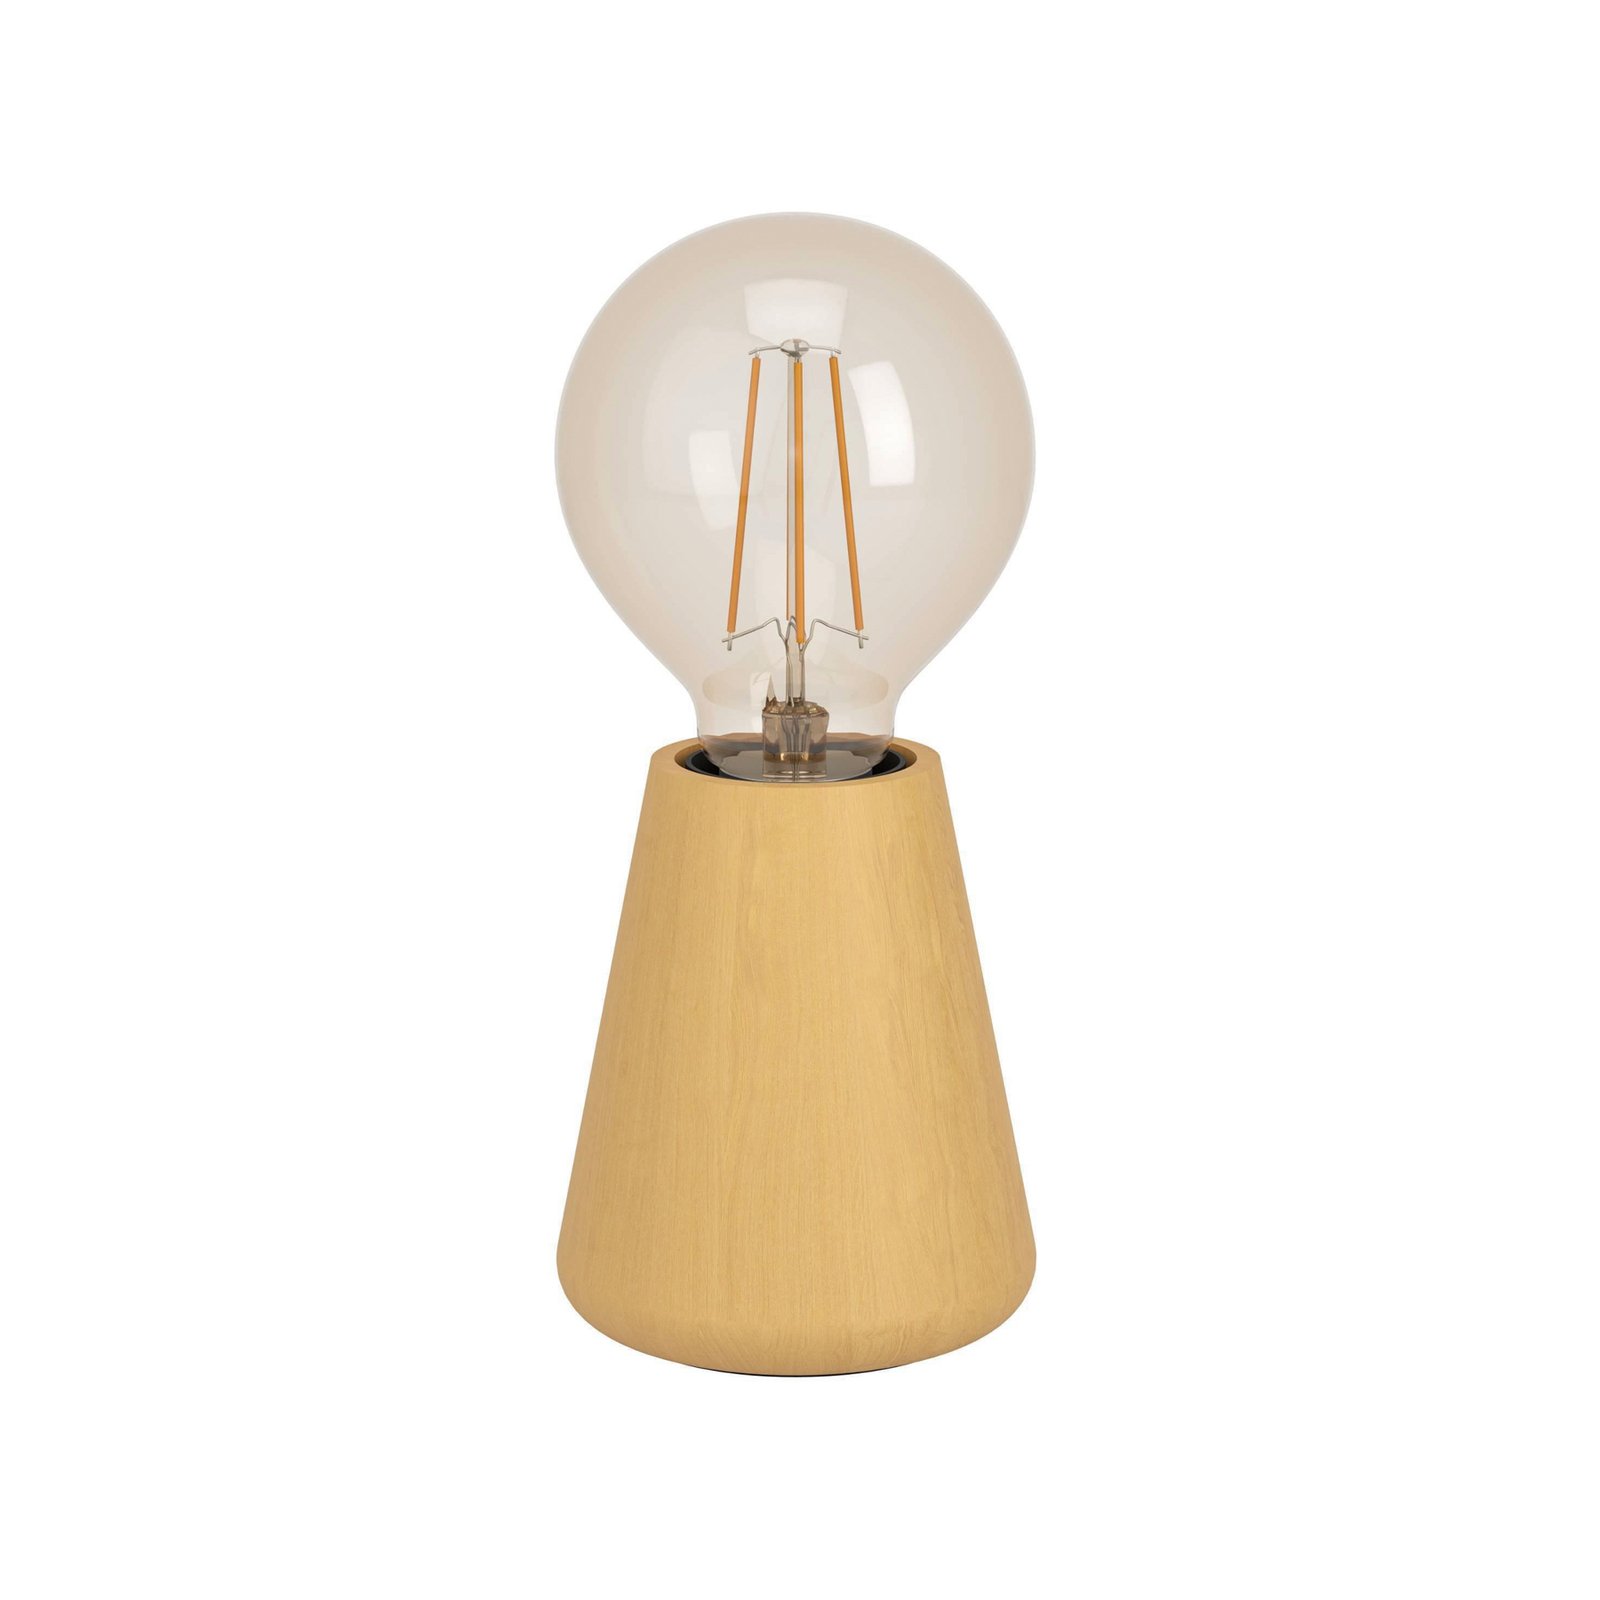 Asby table lamp, light wood, height 10 cm, wood